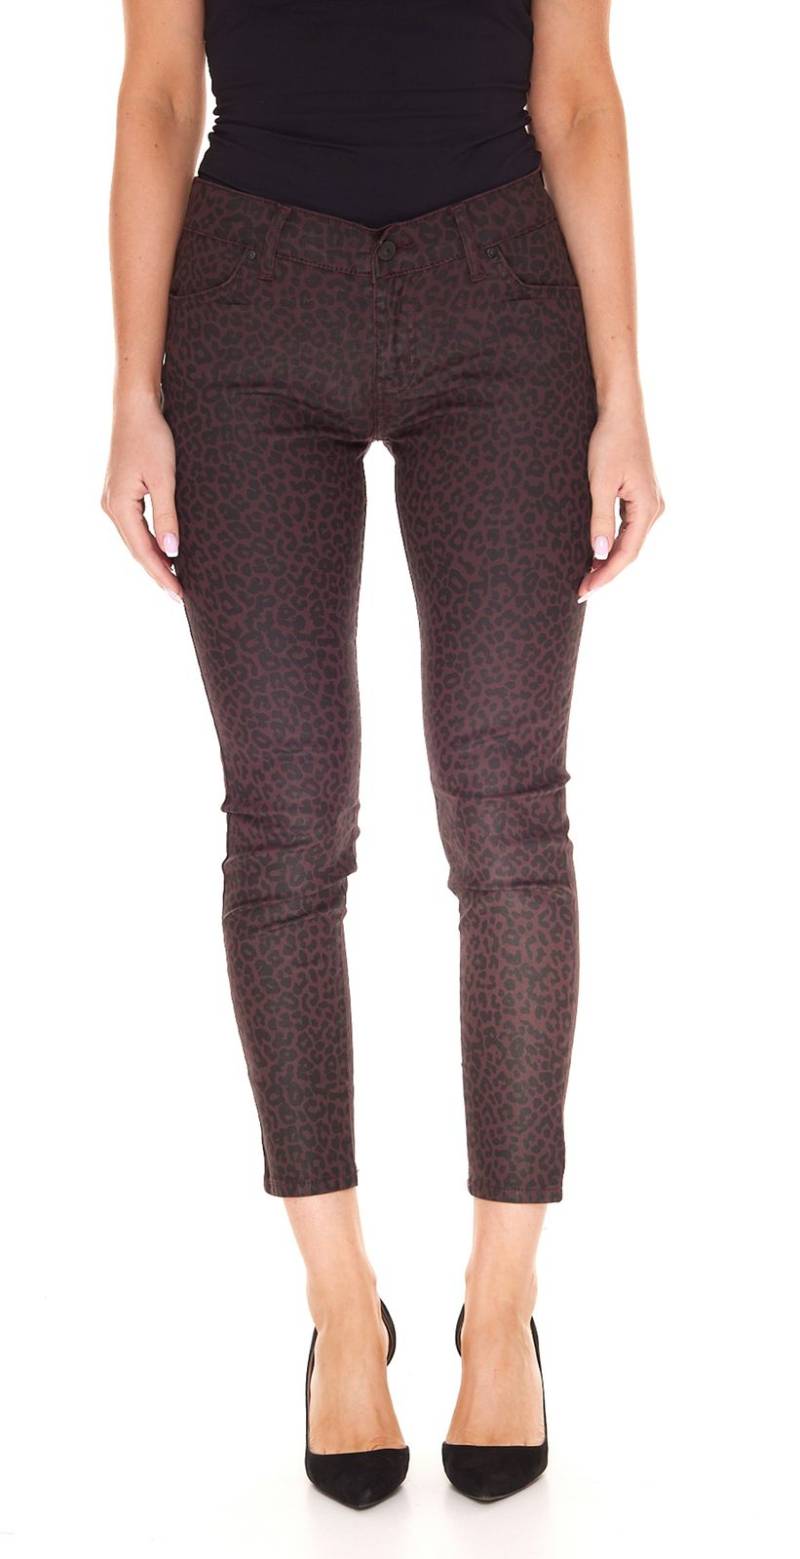 LTB Lonia Coated Damen Super Skinny Jeans mit Leopard-Waschung Mid Rise Hose 51032 14533 51944 Bordeaux-Rot von LTB